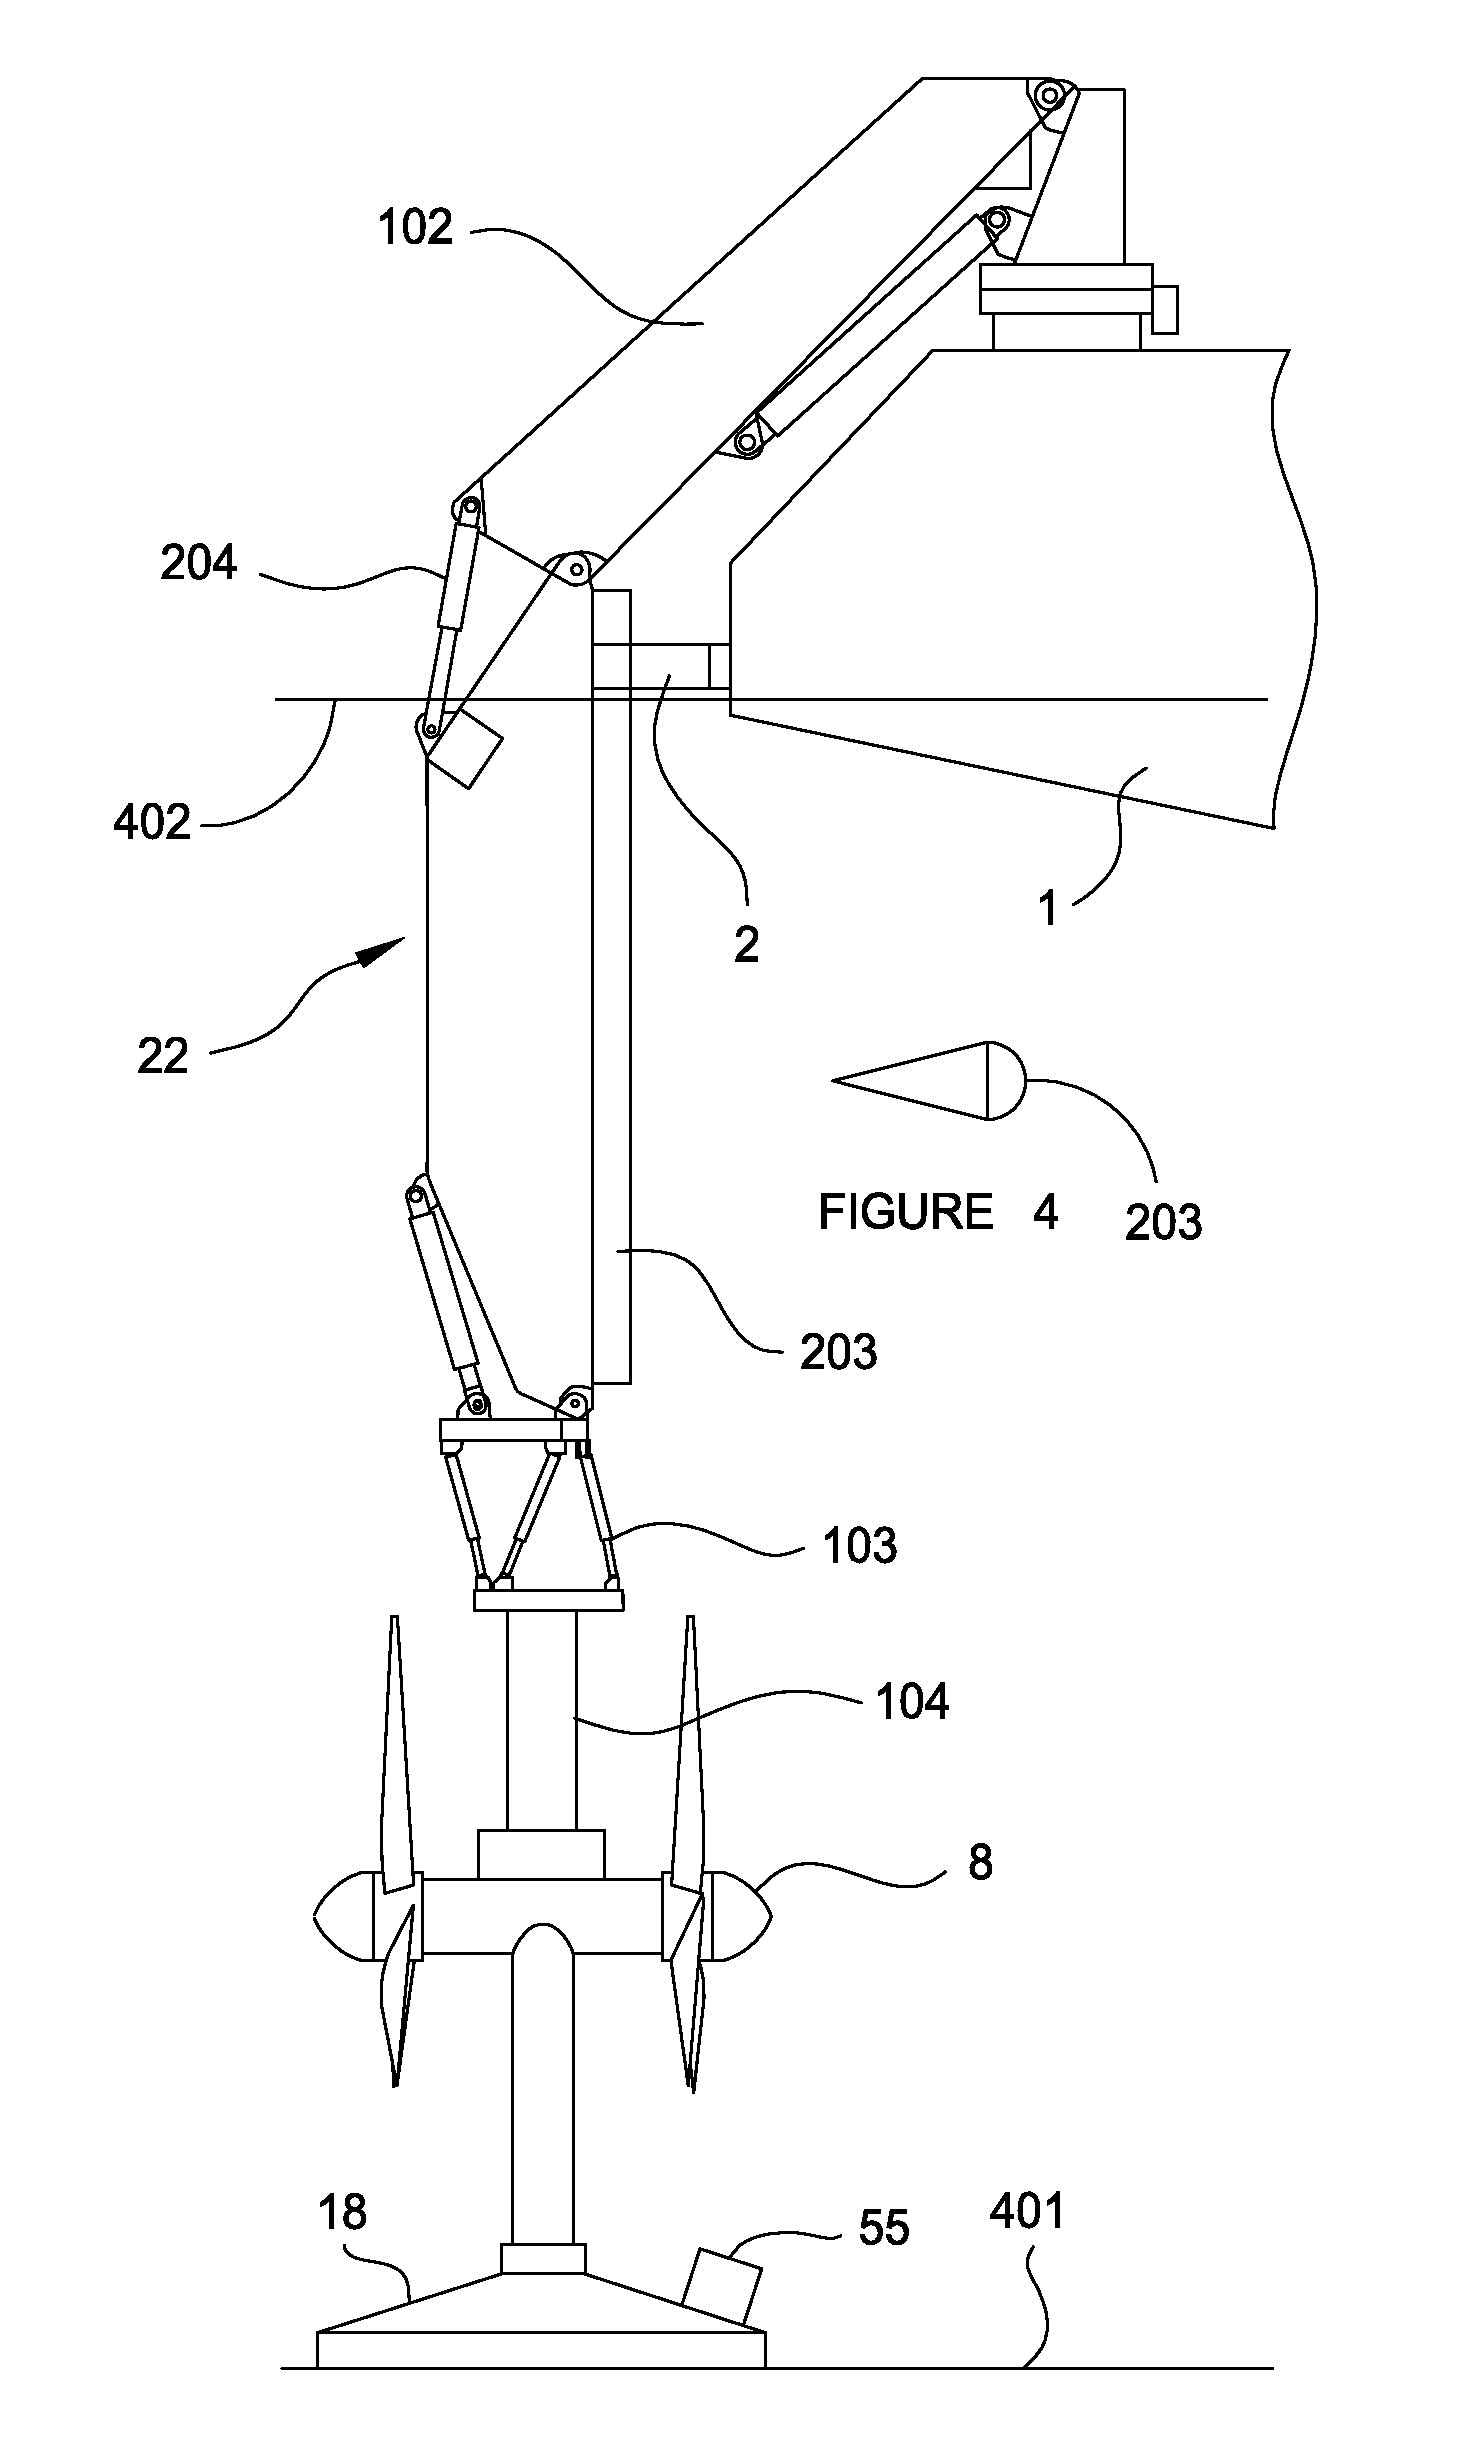 Apparatus and methods of positioning a subsea object